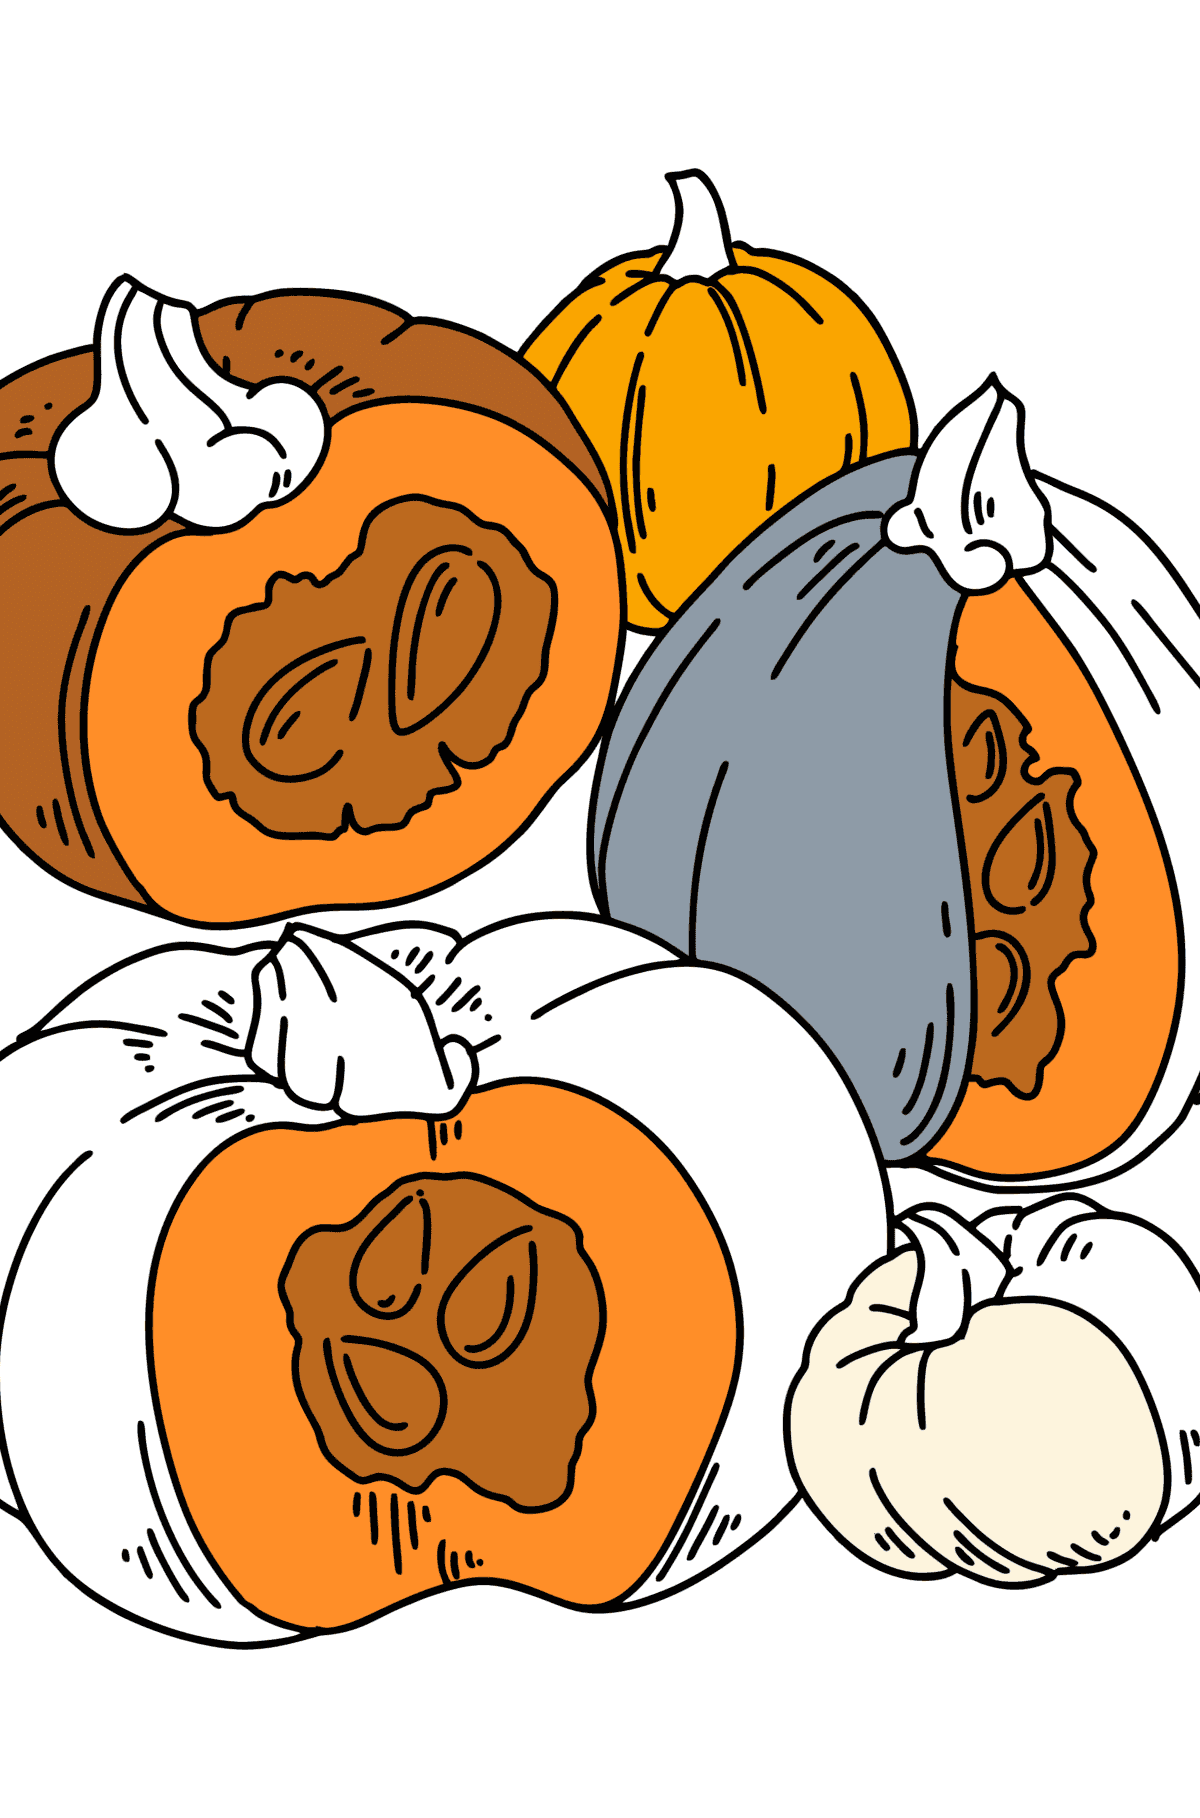 Coloring page Autumn - Pumpkin harvest - Coloring Pages for Kids